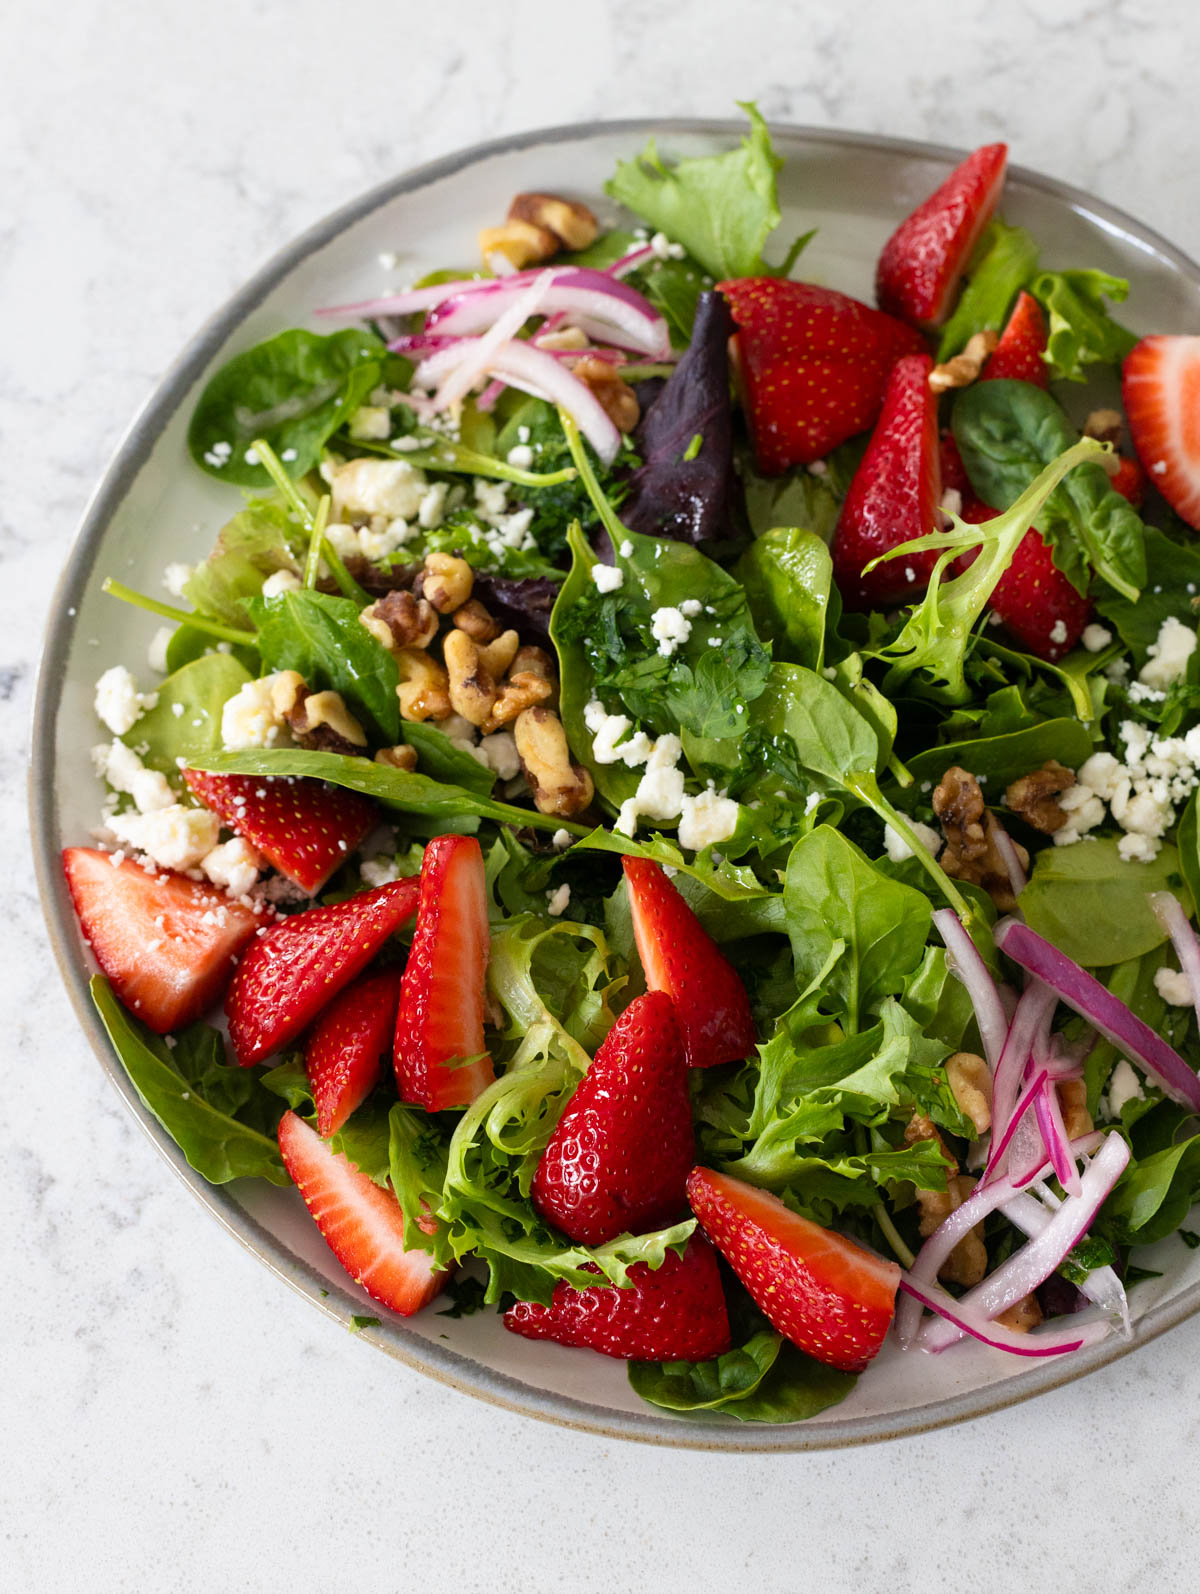 A plate filled with salad greens, fresh strawberries, and pickled red onions.